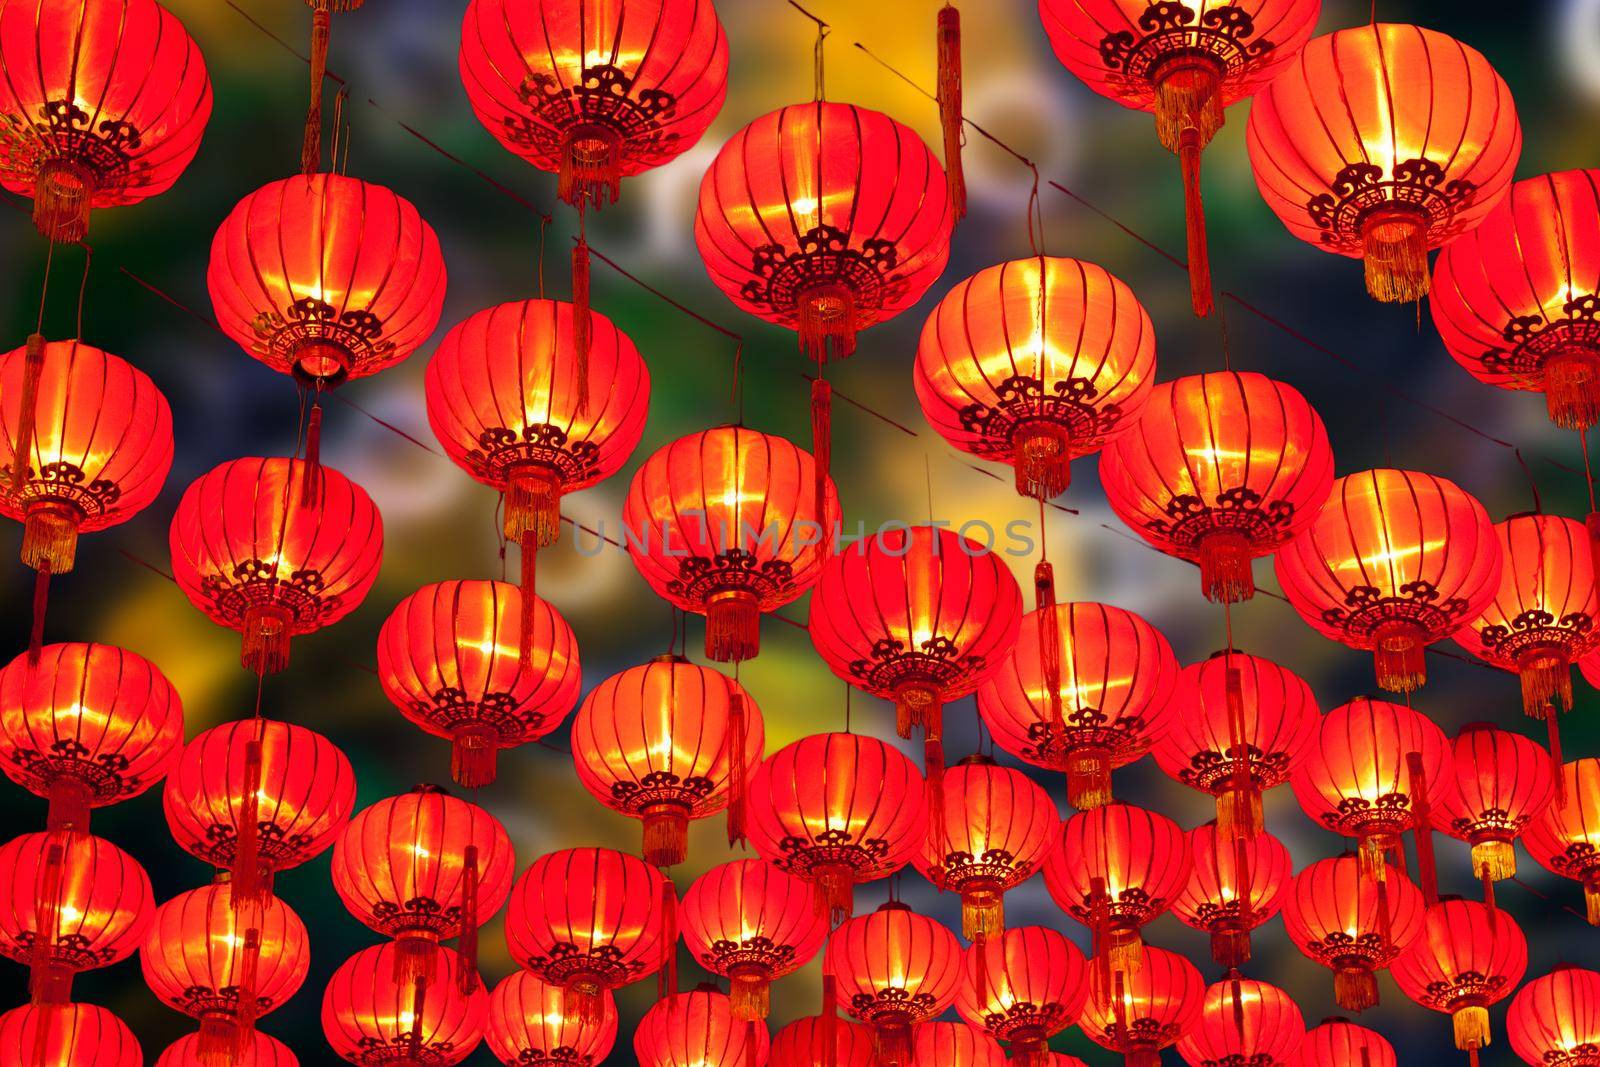 Chinese lanterns in Chinatown. by toa55